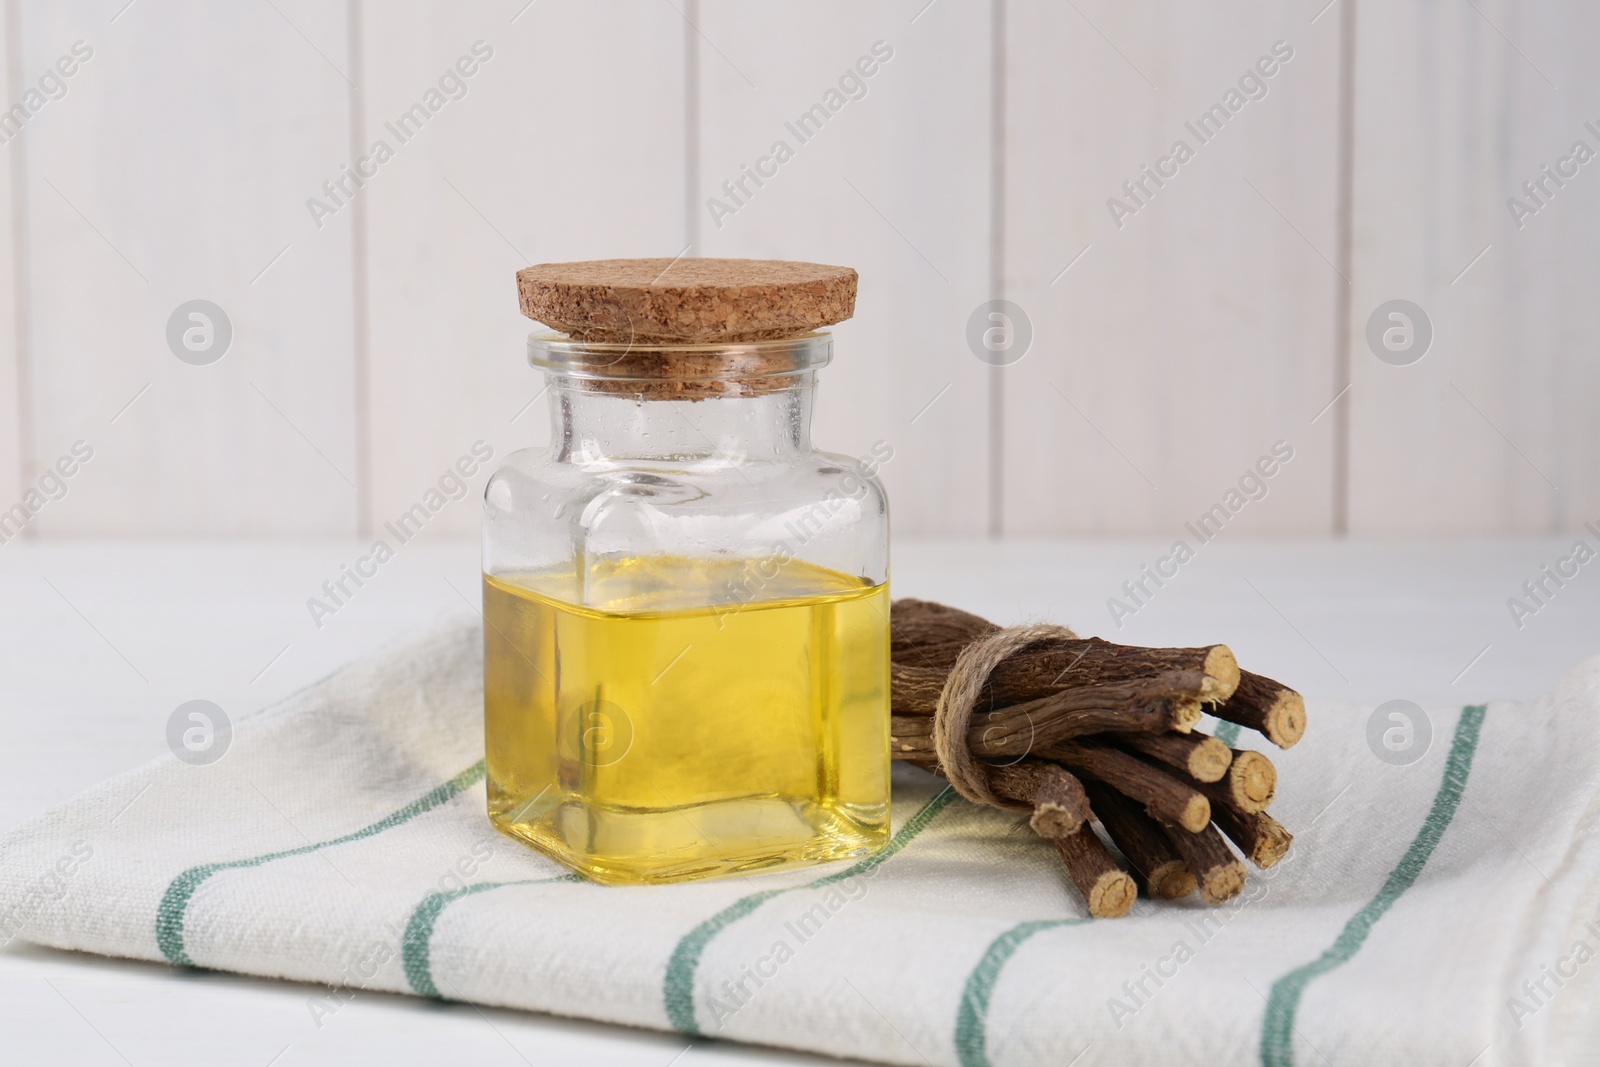 Photo of Dried sticks of licorice roots and essential oil on white table